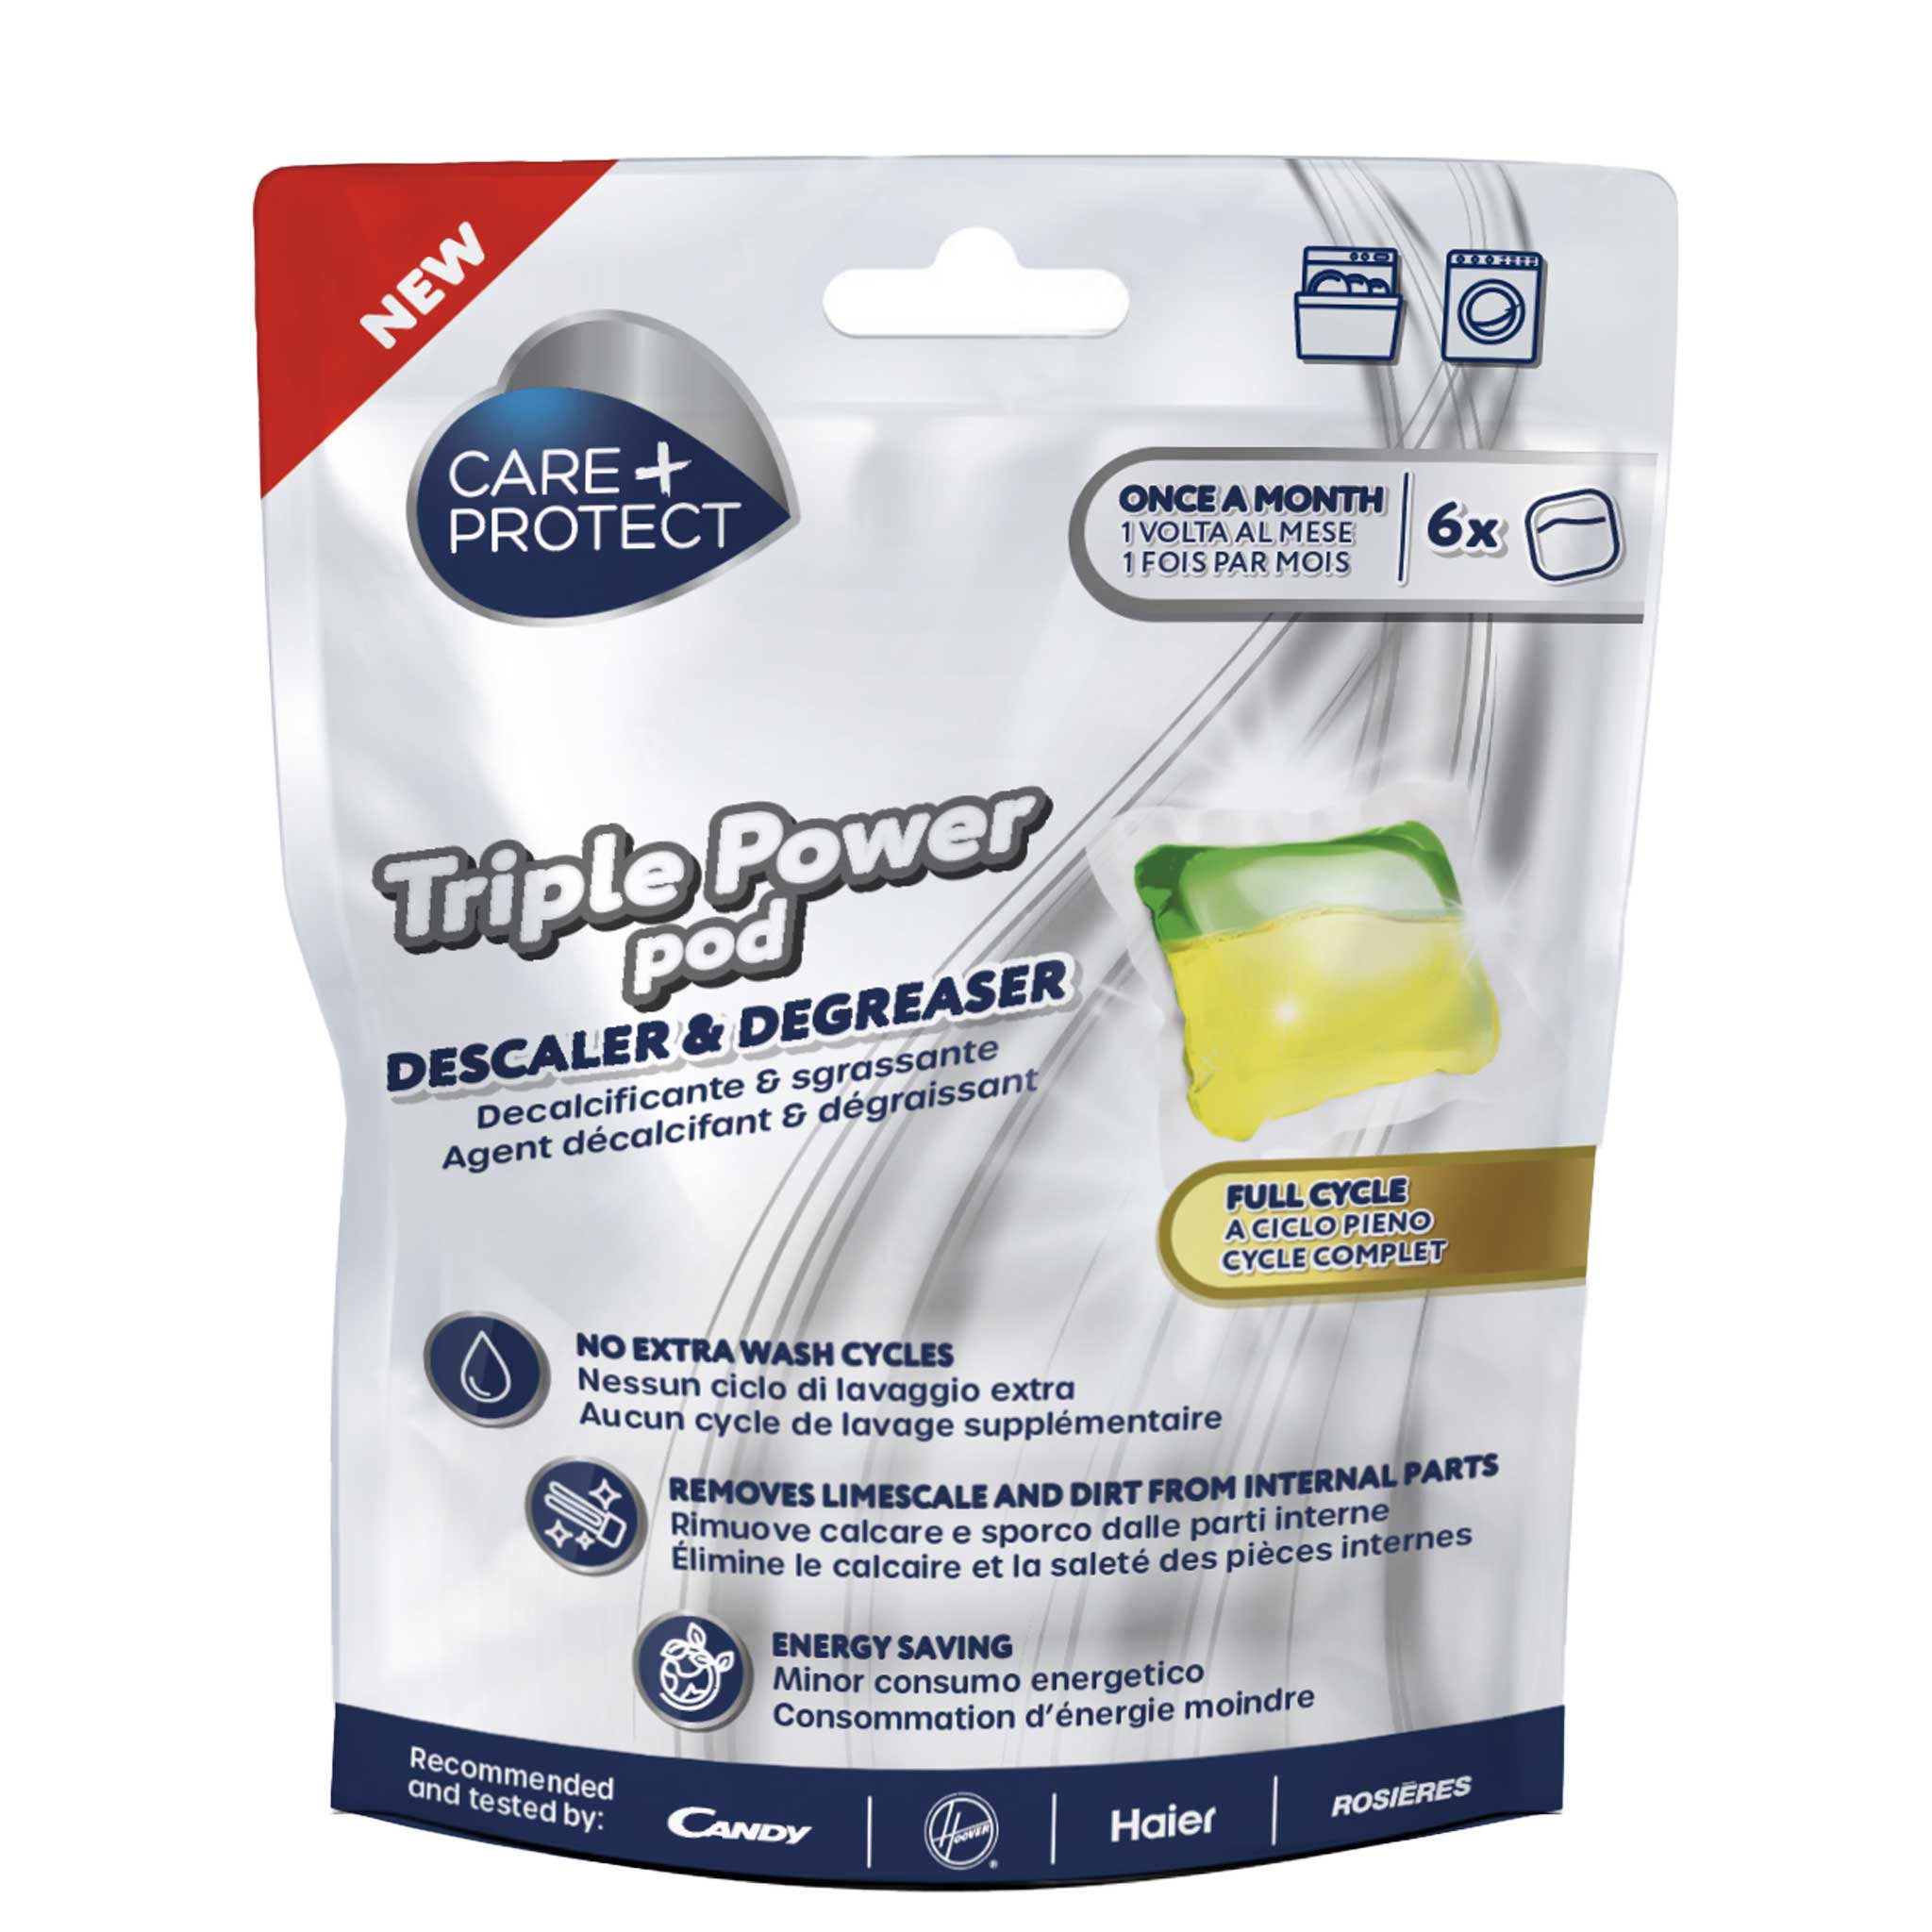 Triple Power Pod Descaler and Degreaser for Dishwasher and Washing Machine